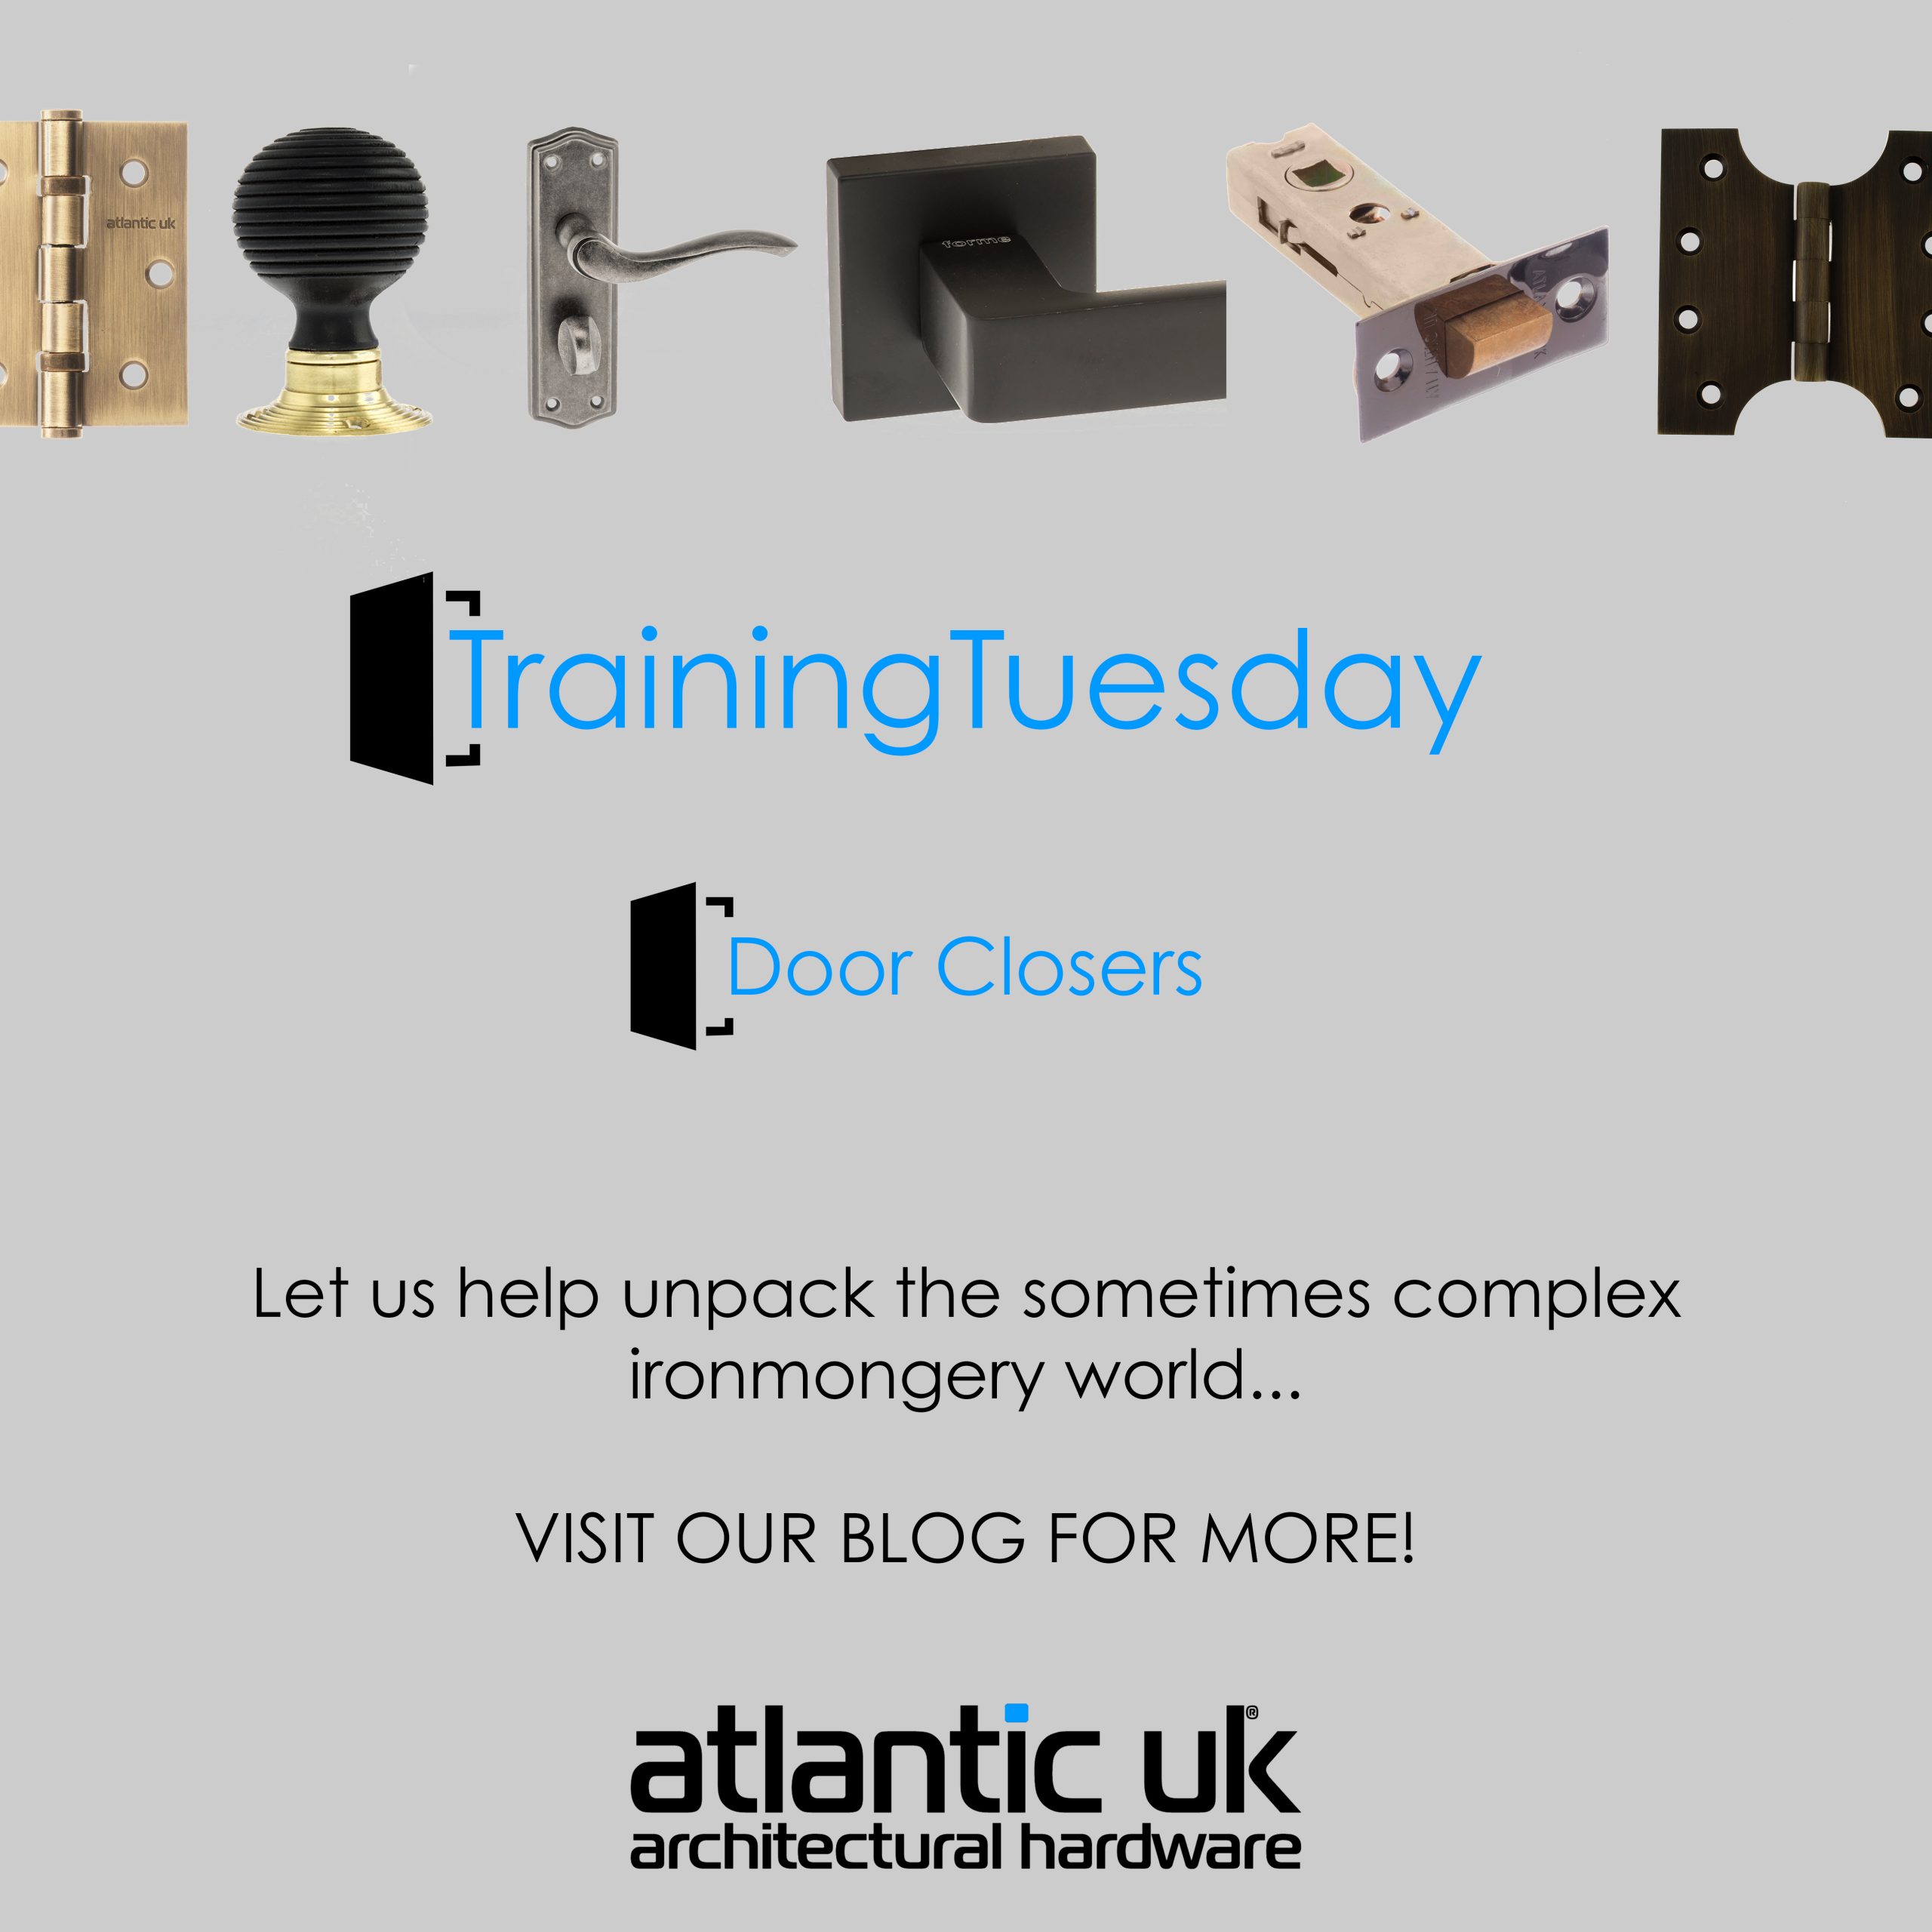 Training Tuesday!  Learn about Door Closers! image